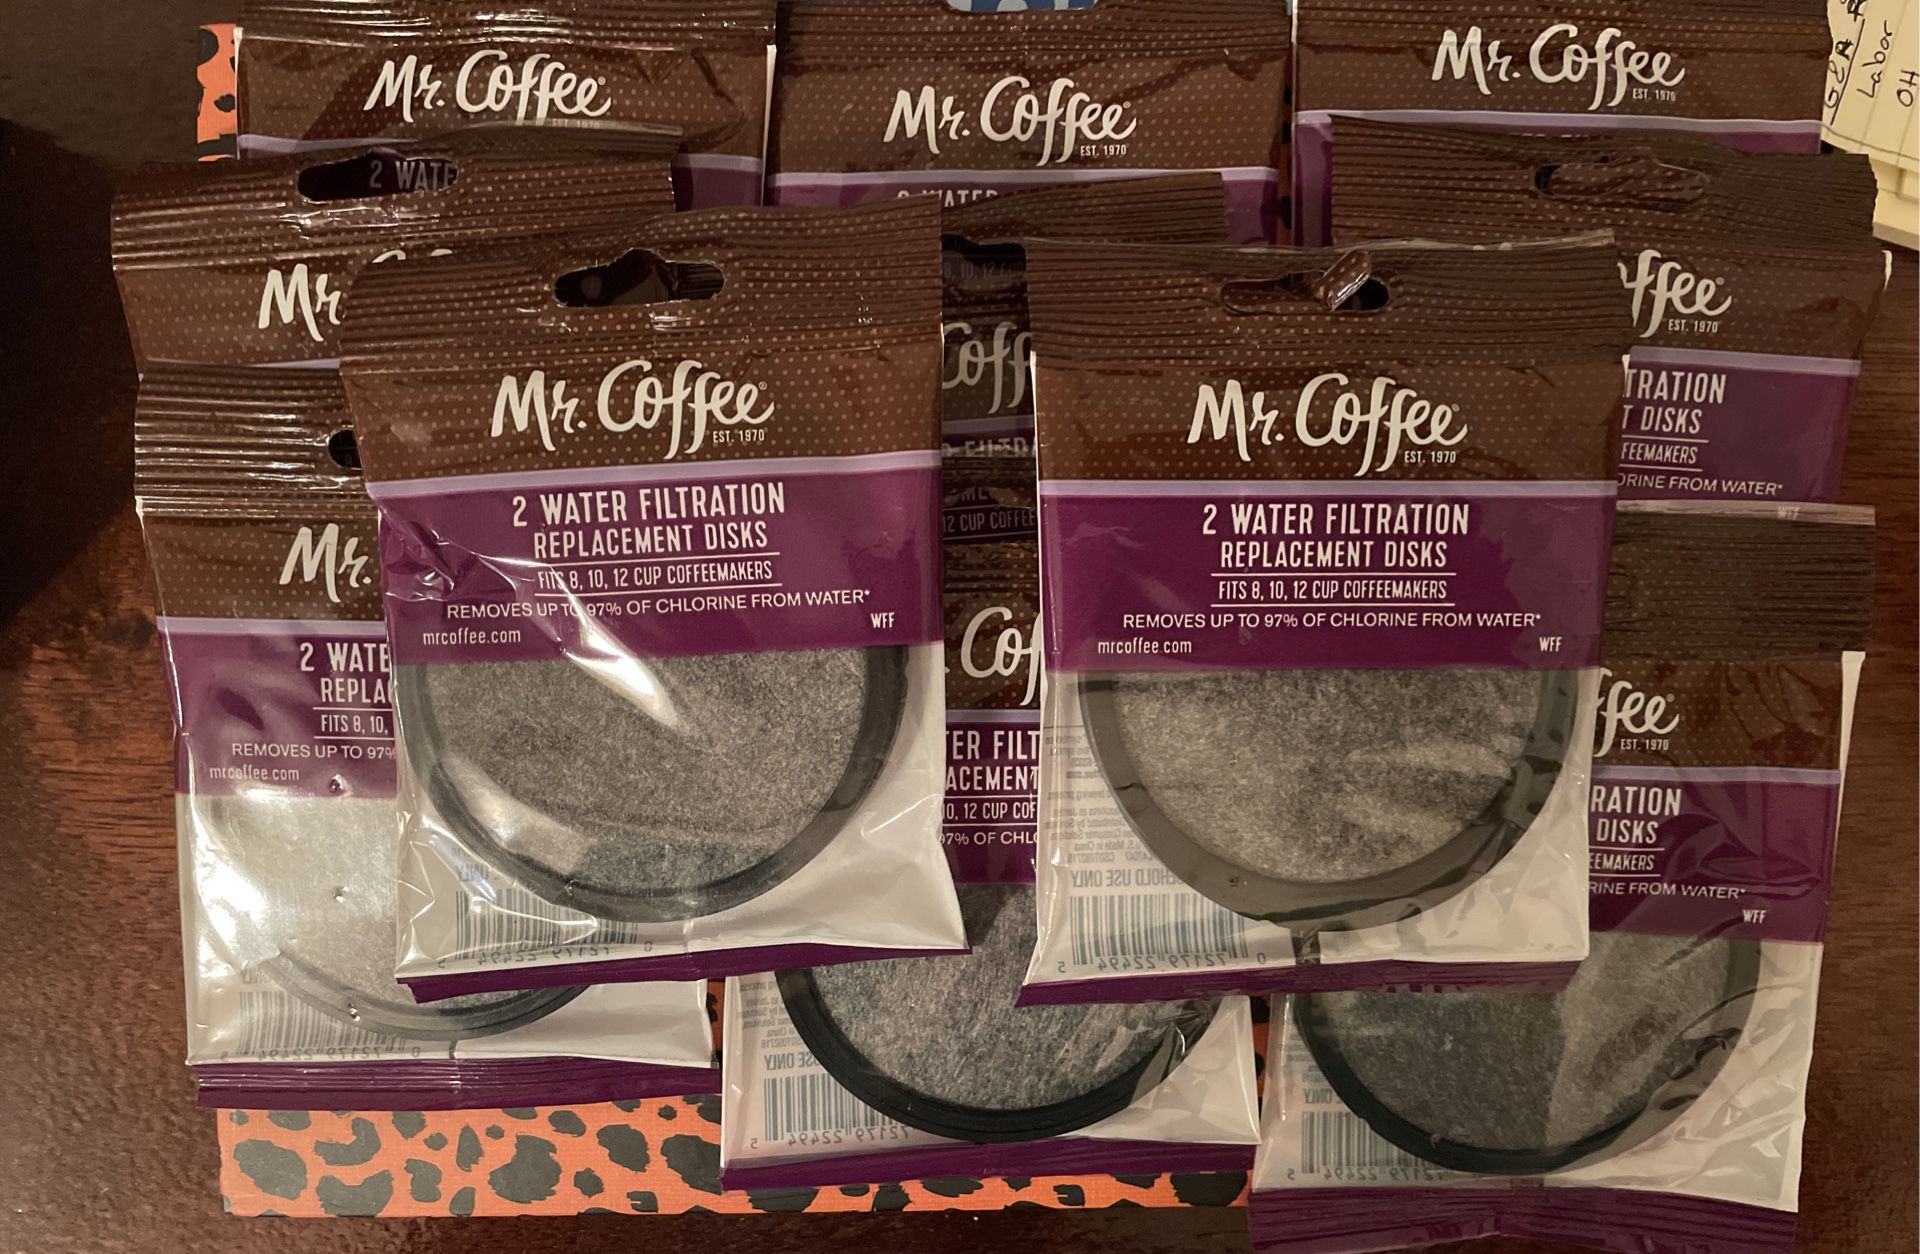 ☕️☕️Mr. Coffee Water Filtration Replacement Disks☕️☕️